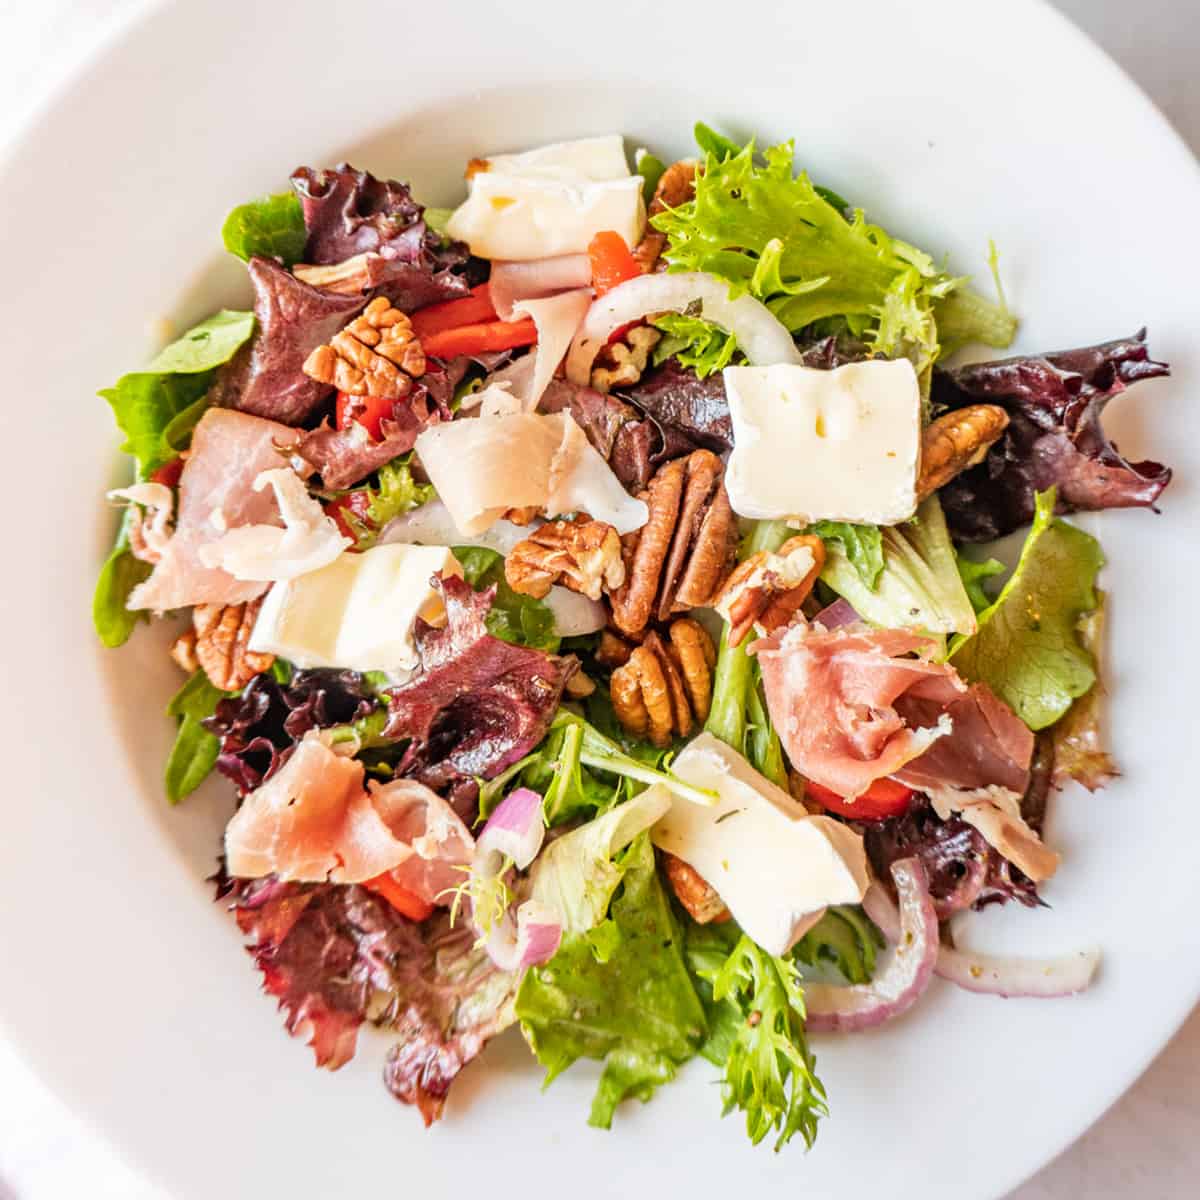 white salad bowl filled with salad mix, prosciutto, brie, red onion featured image